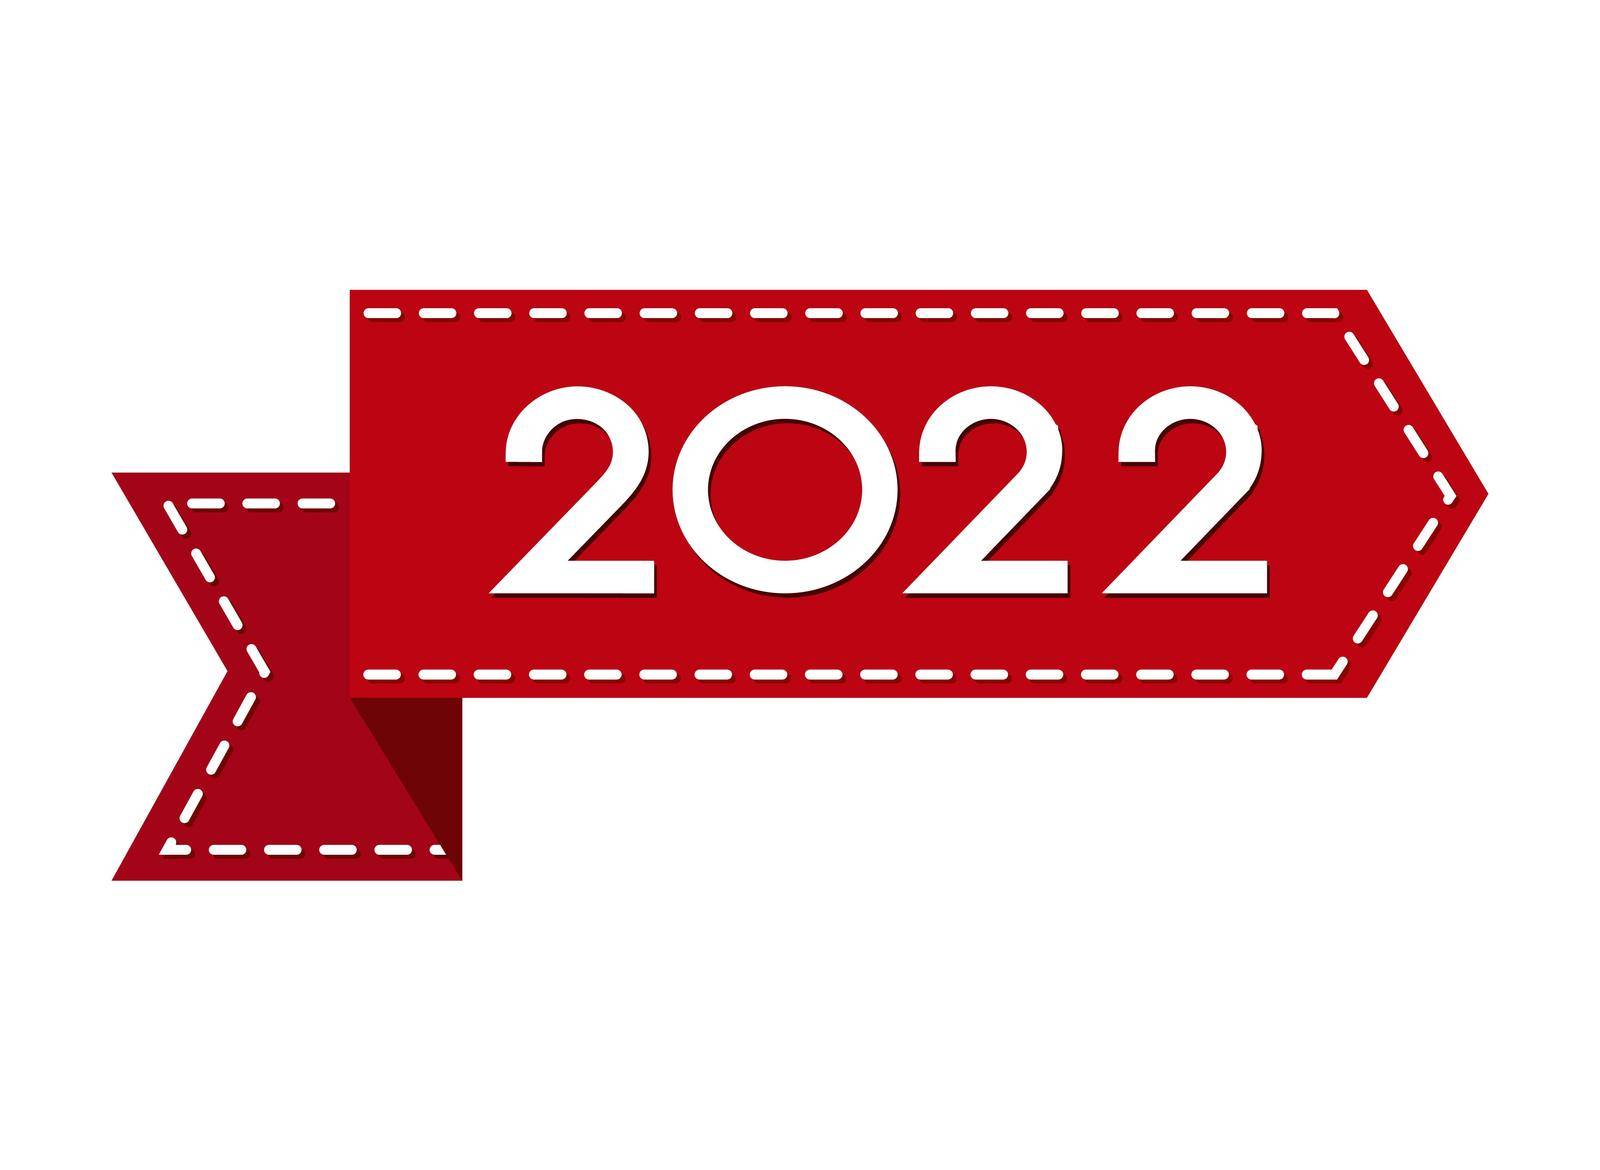 A red ribbon with the number 2022. The new year is 2022. Merry Christmas and Happy New Year. Vector illustration.
